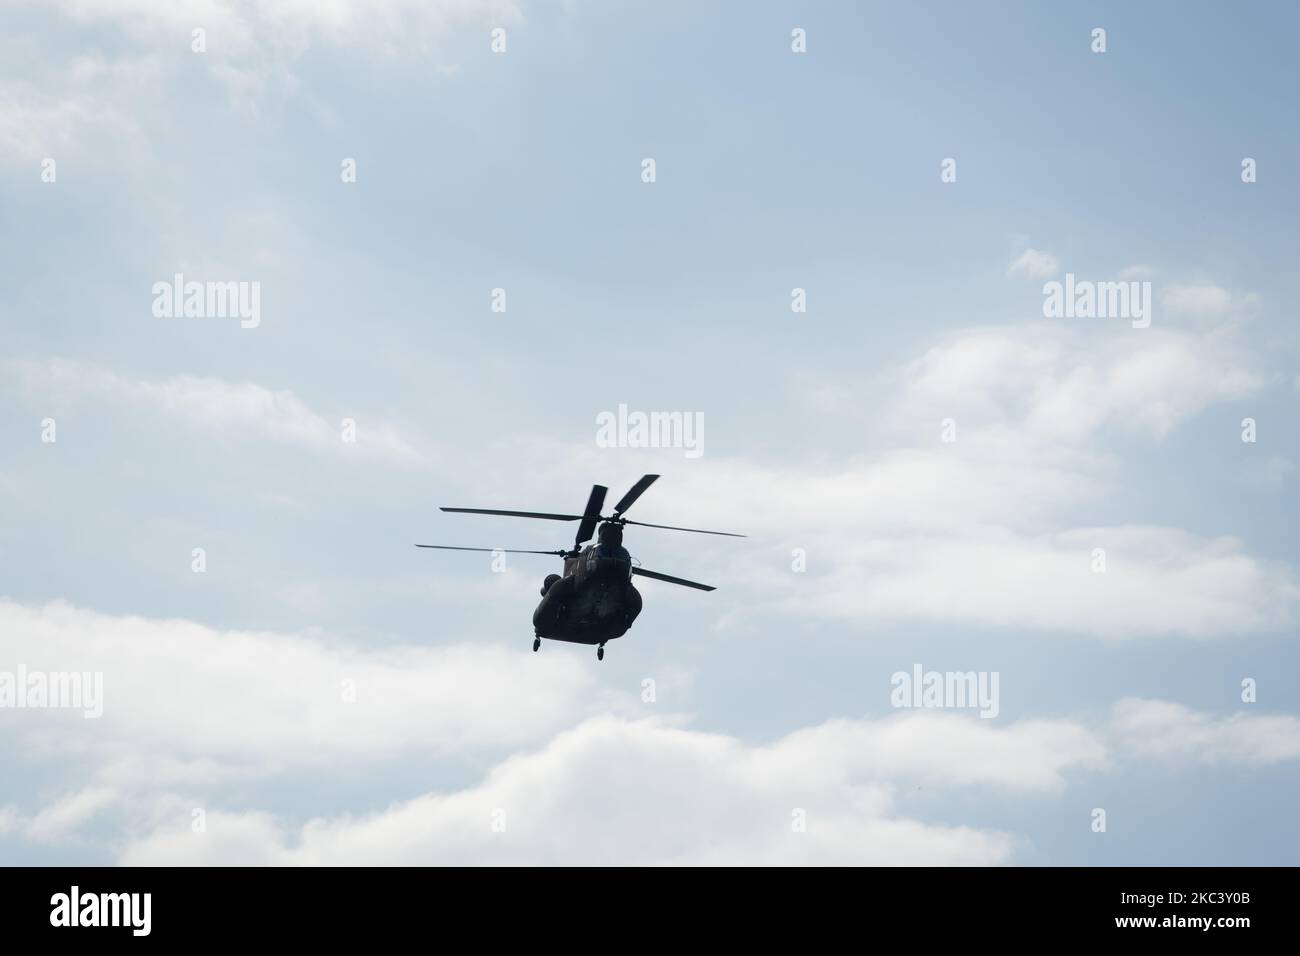 Boeing CH-47 Chinook during an air show. Greek Air Force twin-engine lift helicopter flying during the 28 October Oxi Parade in Thessaloniki, Greece. Stock Photo